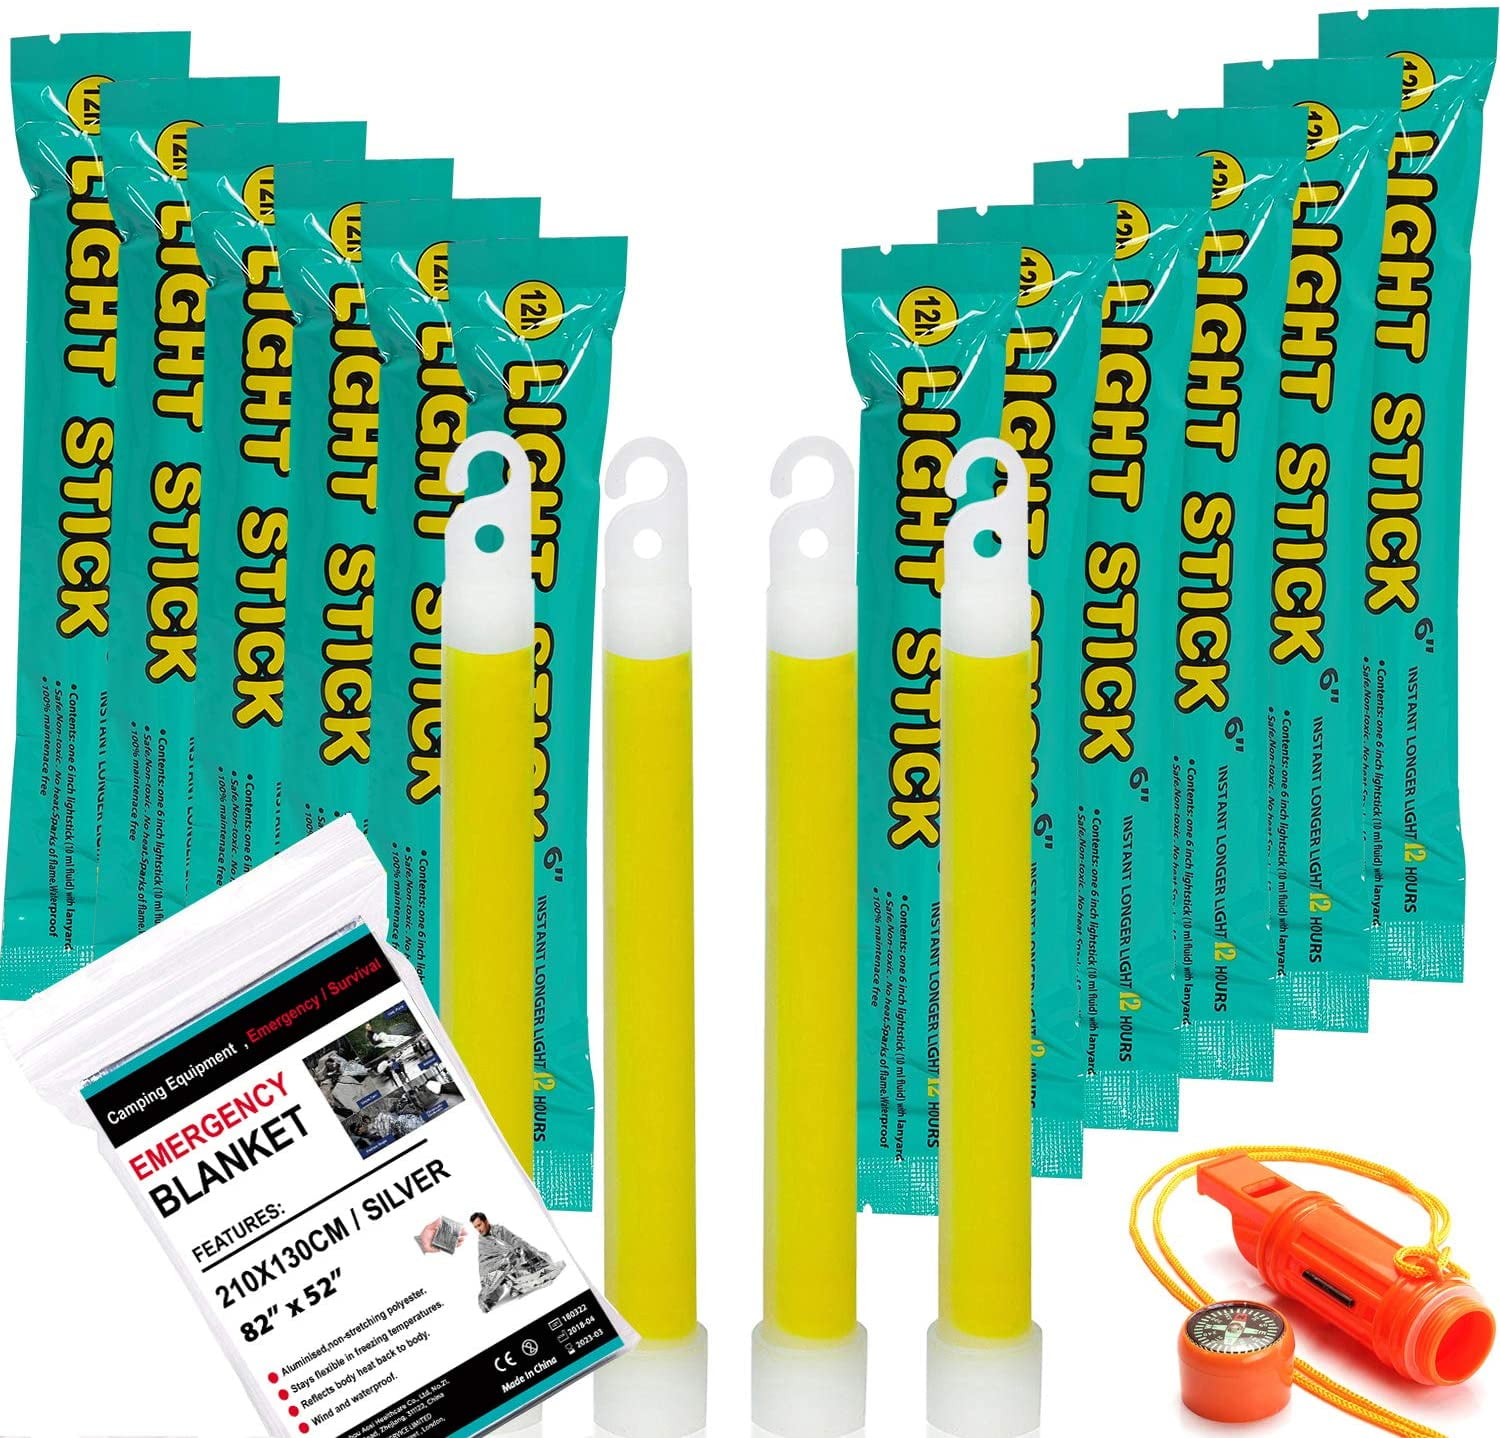 32 Camping Emergency Survival Glow Sticks - 6 Inch Ultra Bright